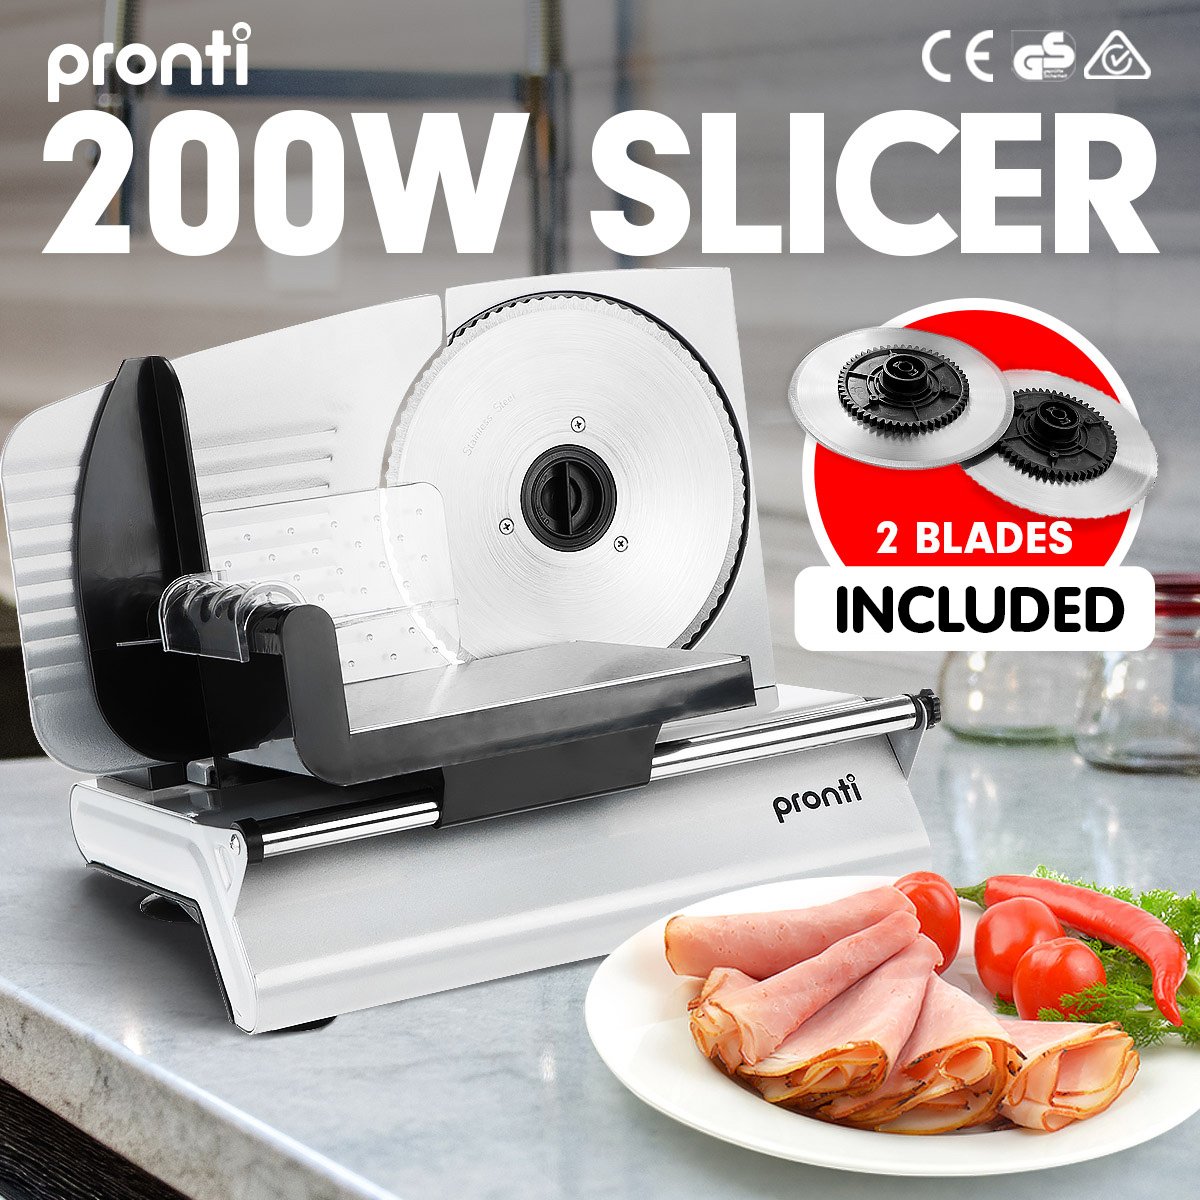 Pronti Deli and Food Electric Meat Slicer 200W Blades Processor - 0